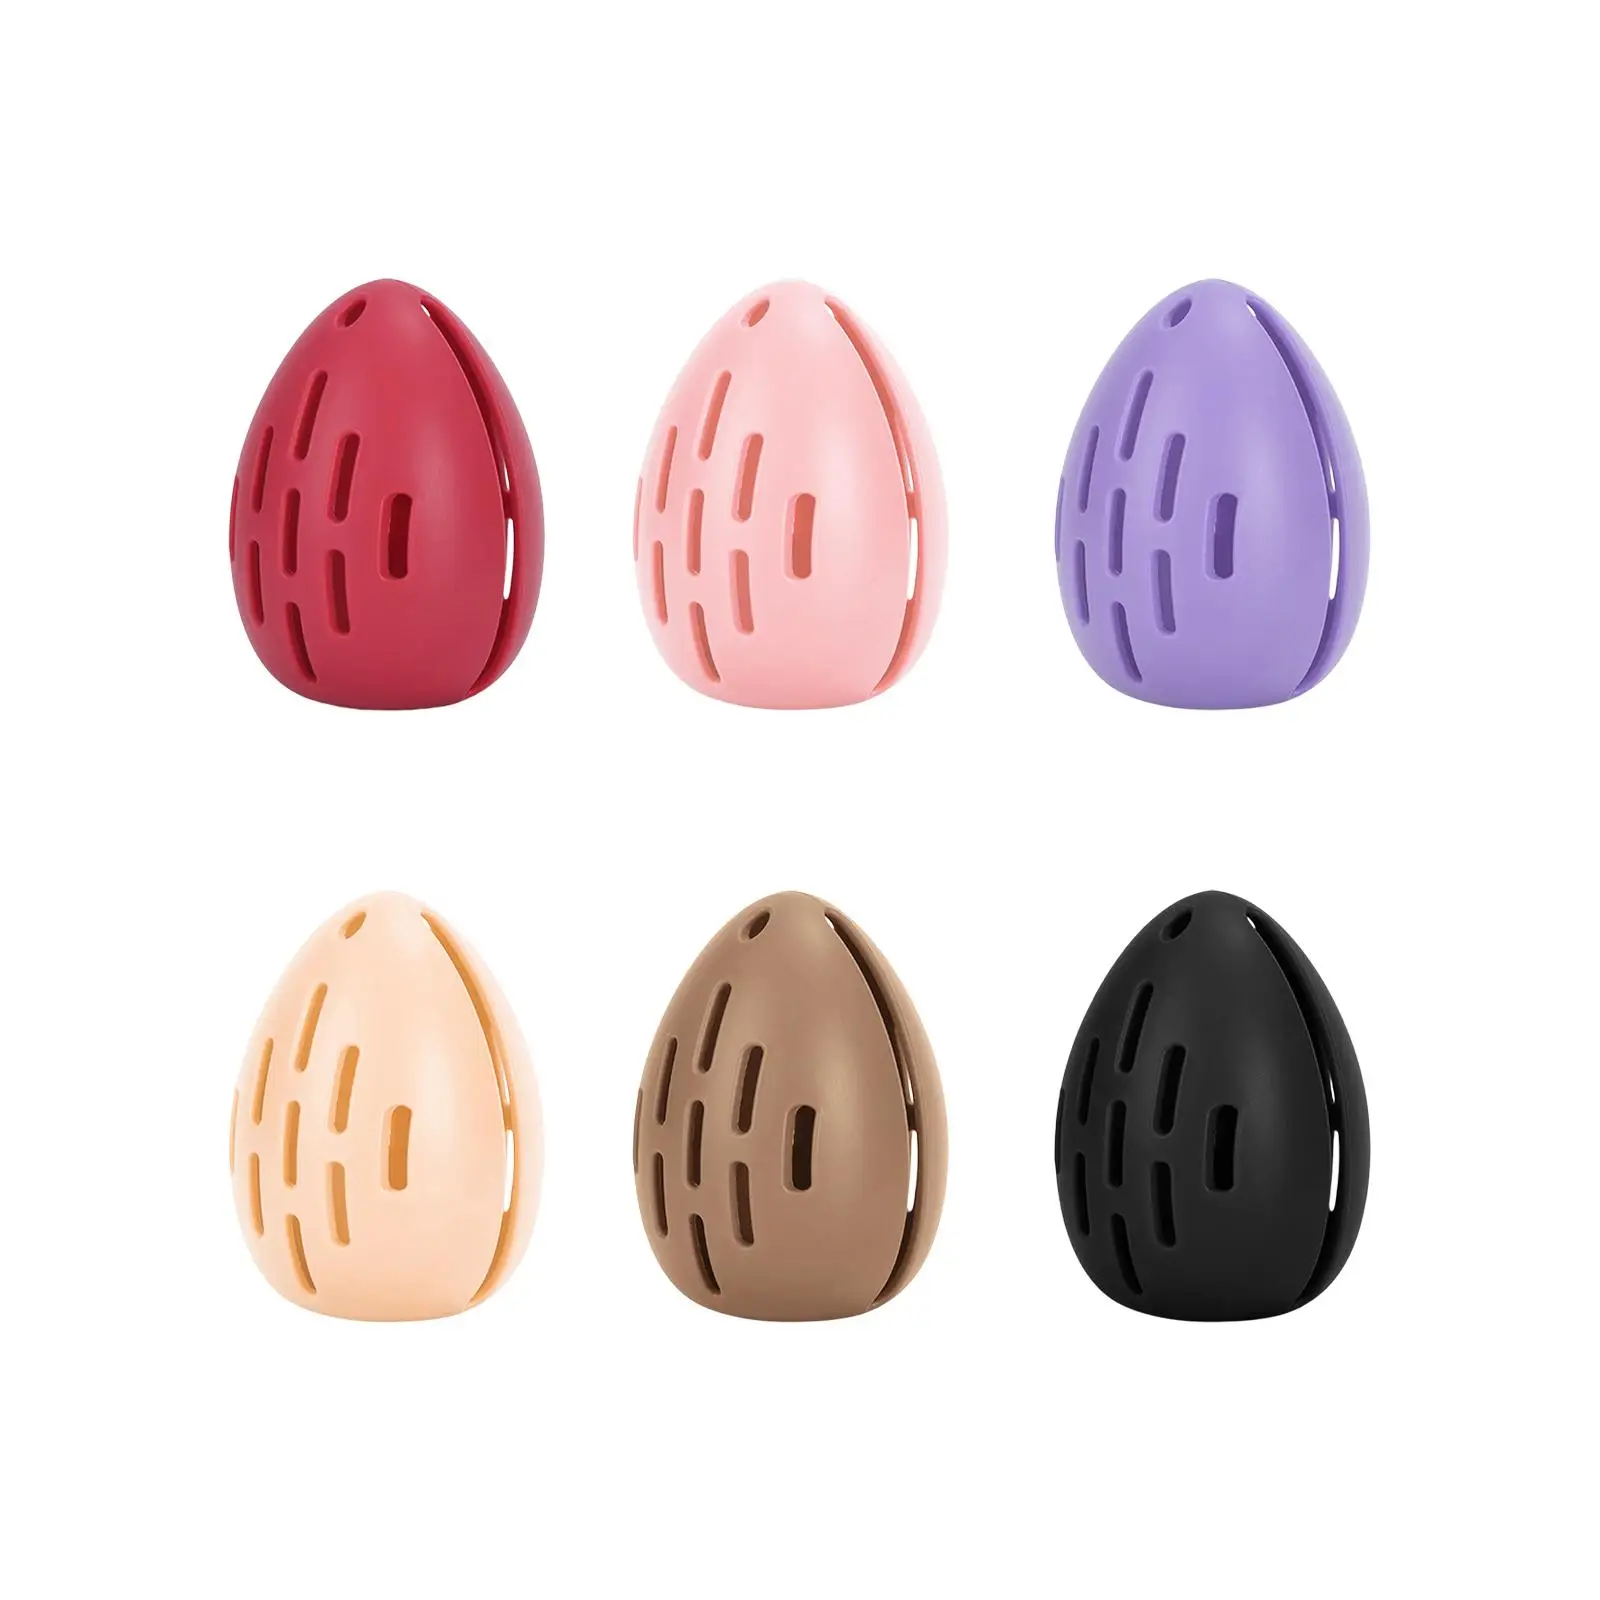 Travel Makeup Sponge Holder Makeup Tool Make up Blender Silicone Case Breathable Cute Comfortable to Touch